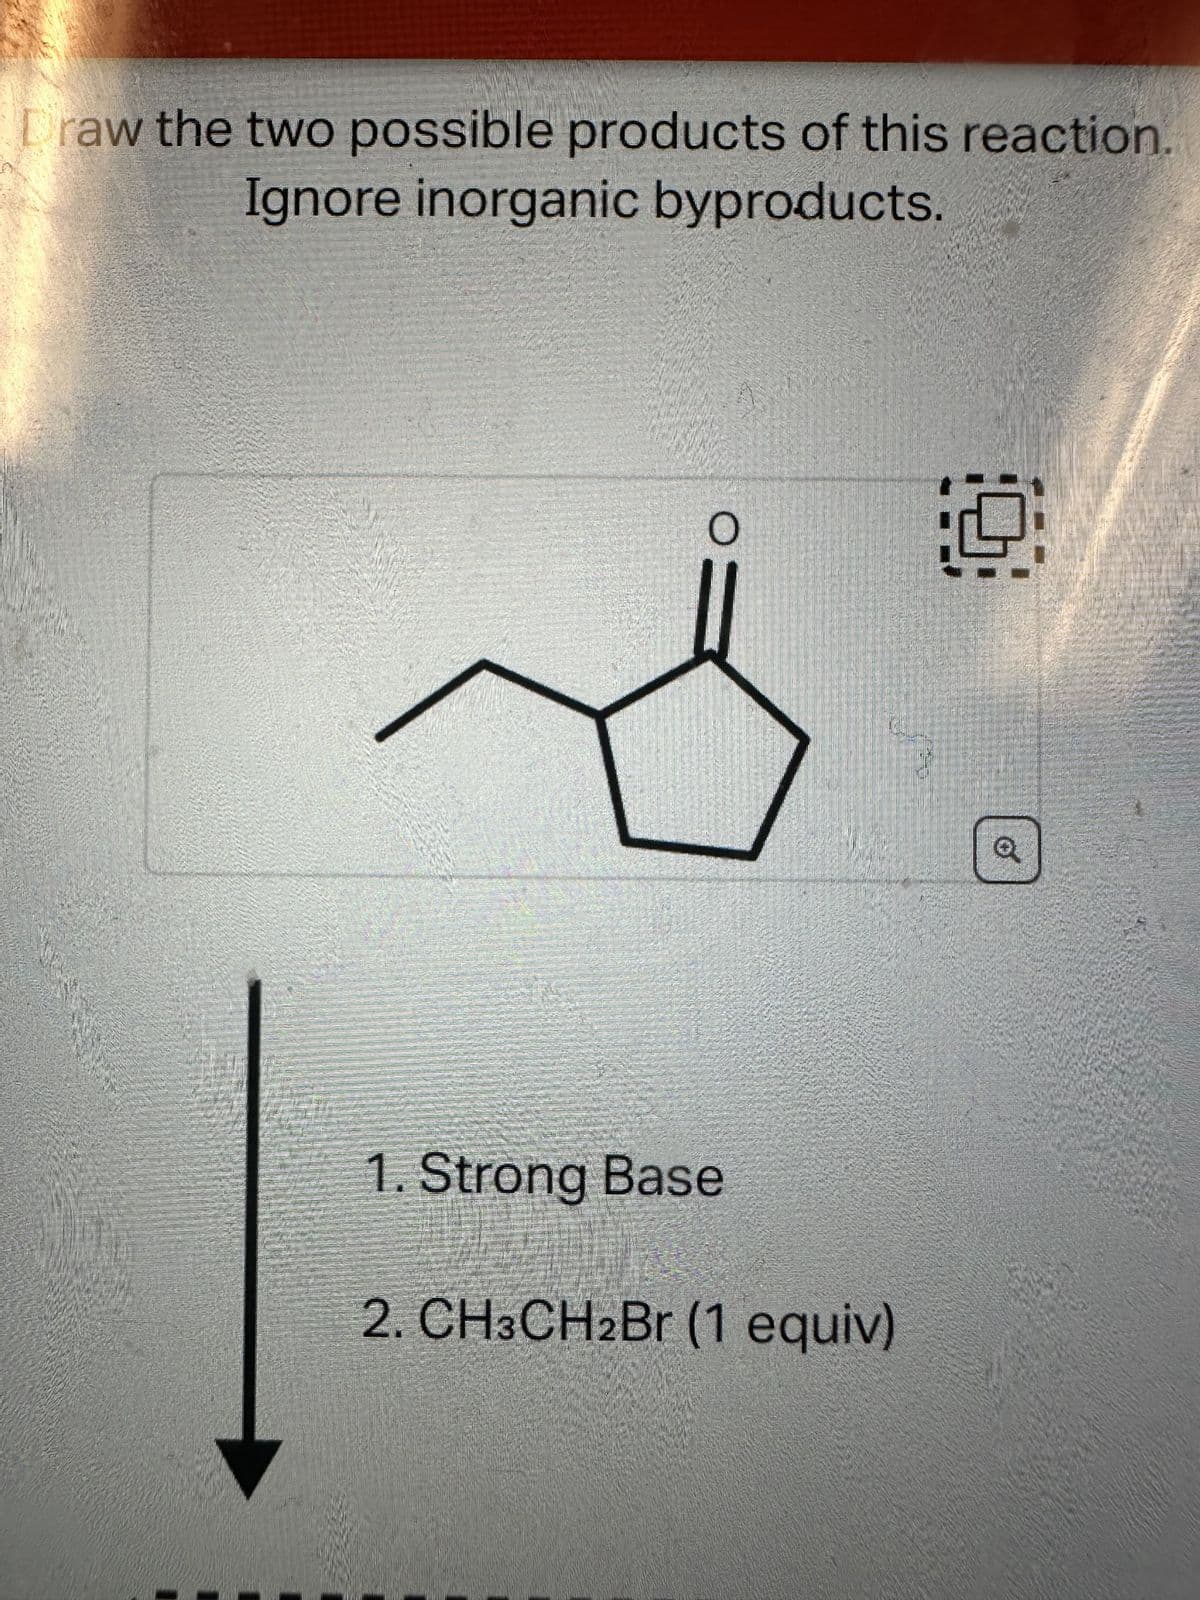 Draw the two possible products of this reaction.
Ignore inorganic byproducts.
O
1. Strong Base
2. CH3CH2Br (1 equiv)
9
Q